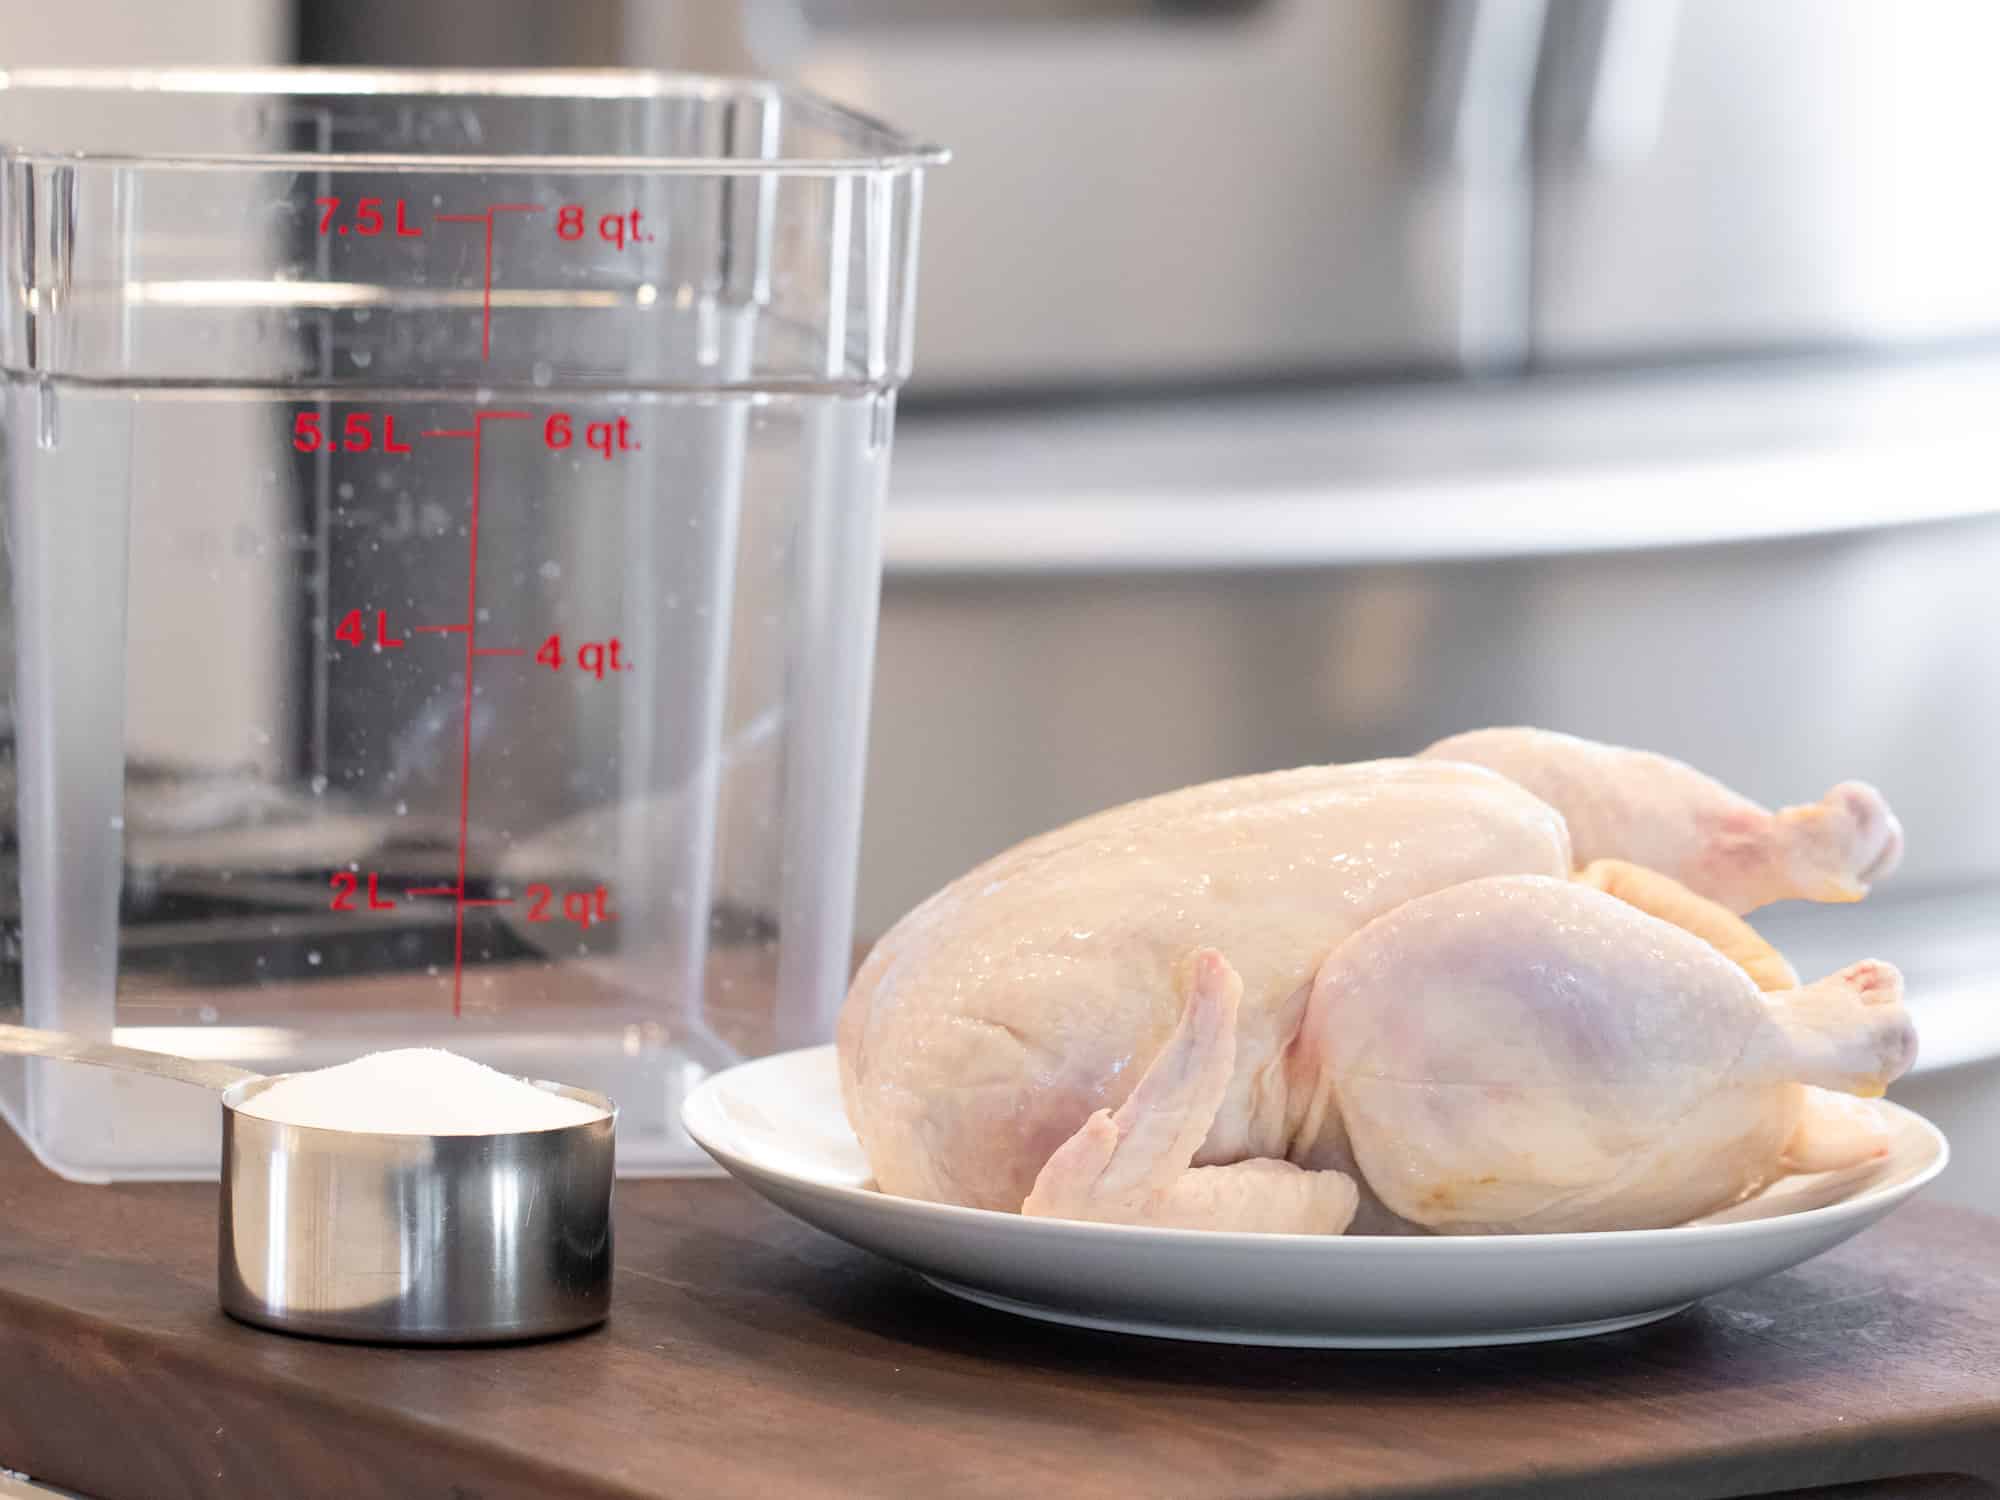 Easy instructions to make a simple brine for a whole chicken including how long to brine and what ingredients to use like salt, sugar, pepper and more.